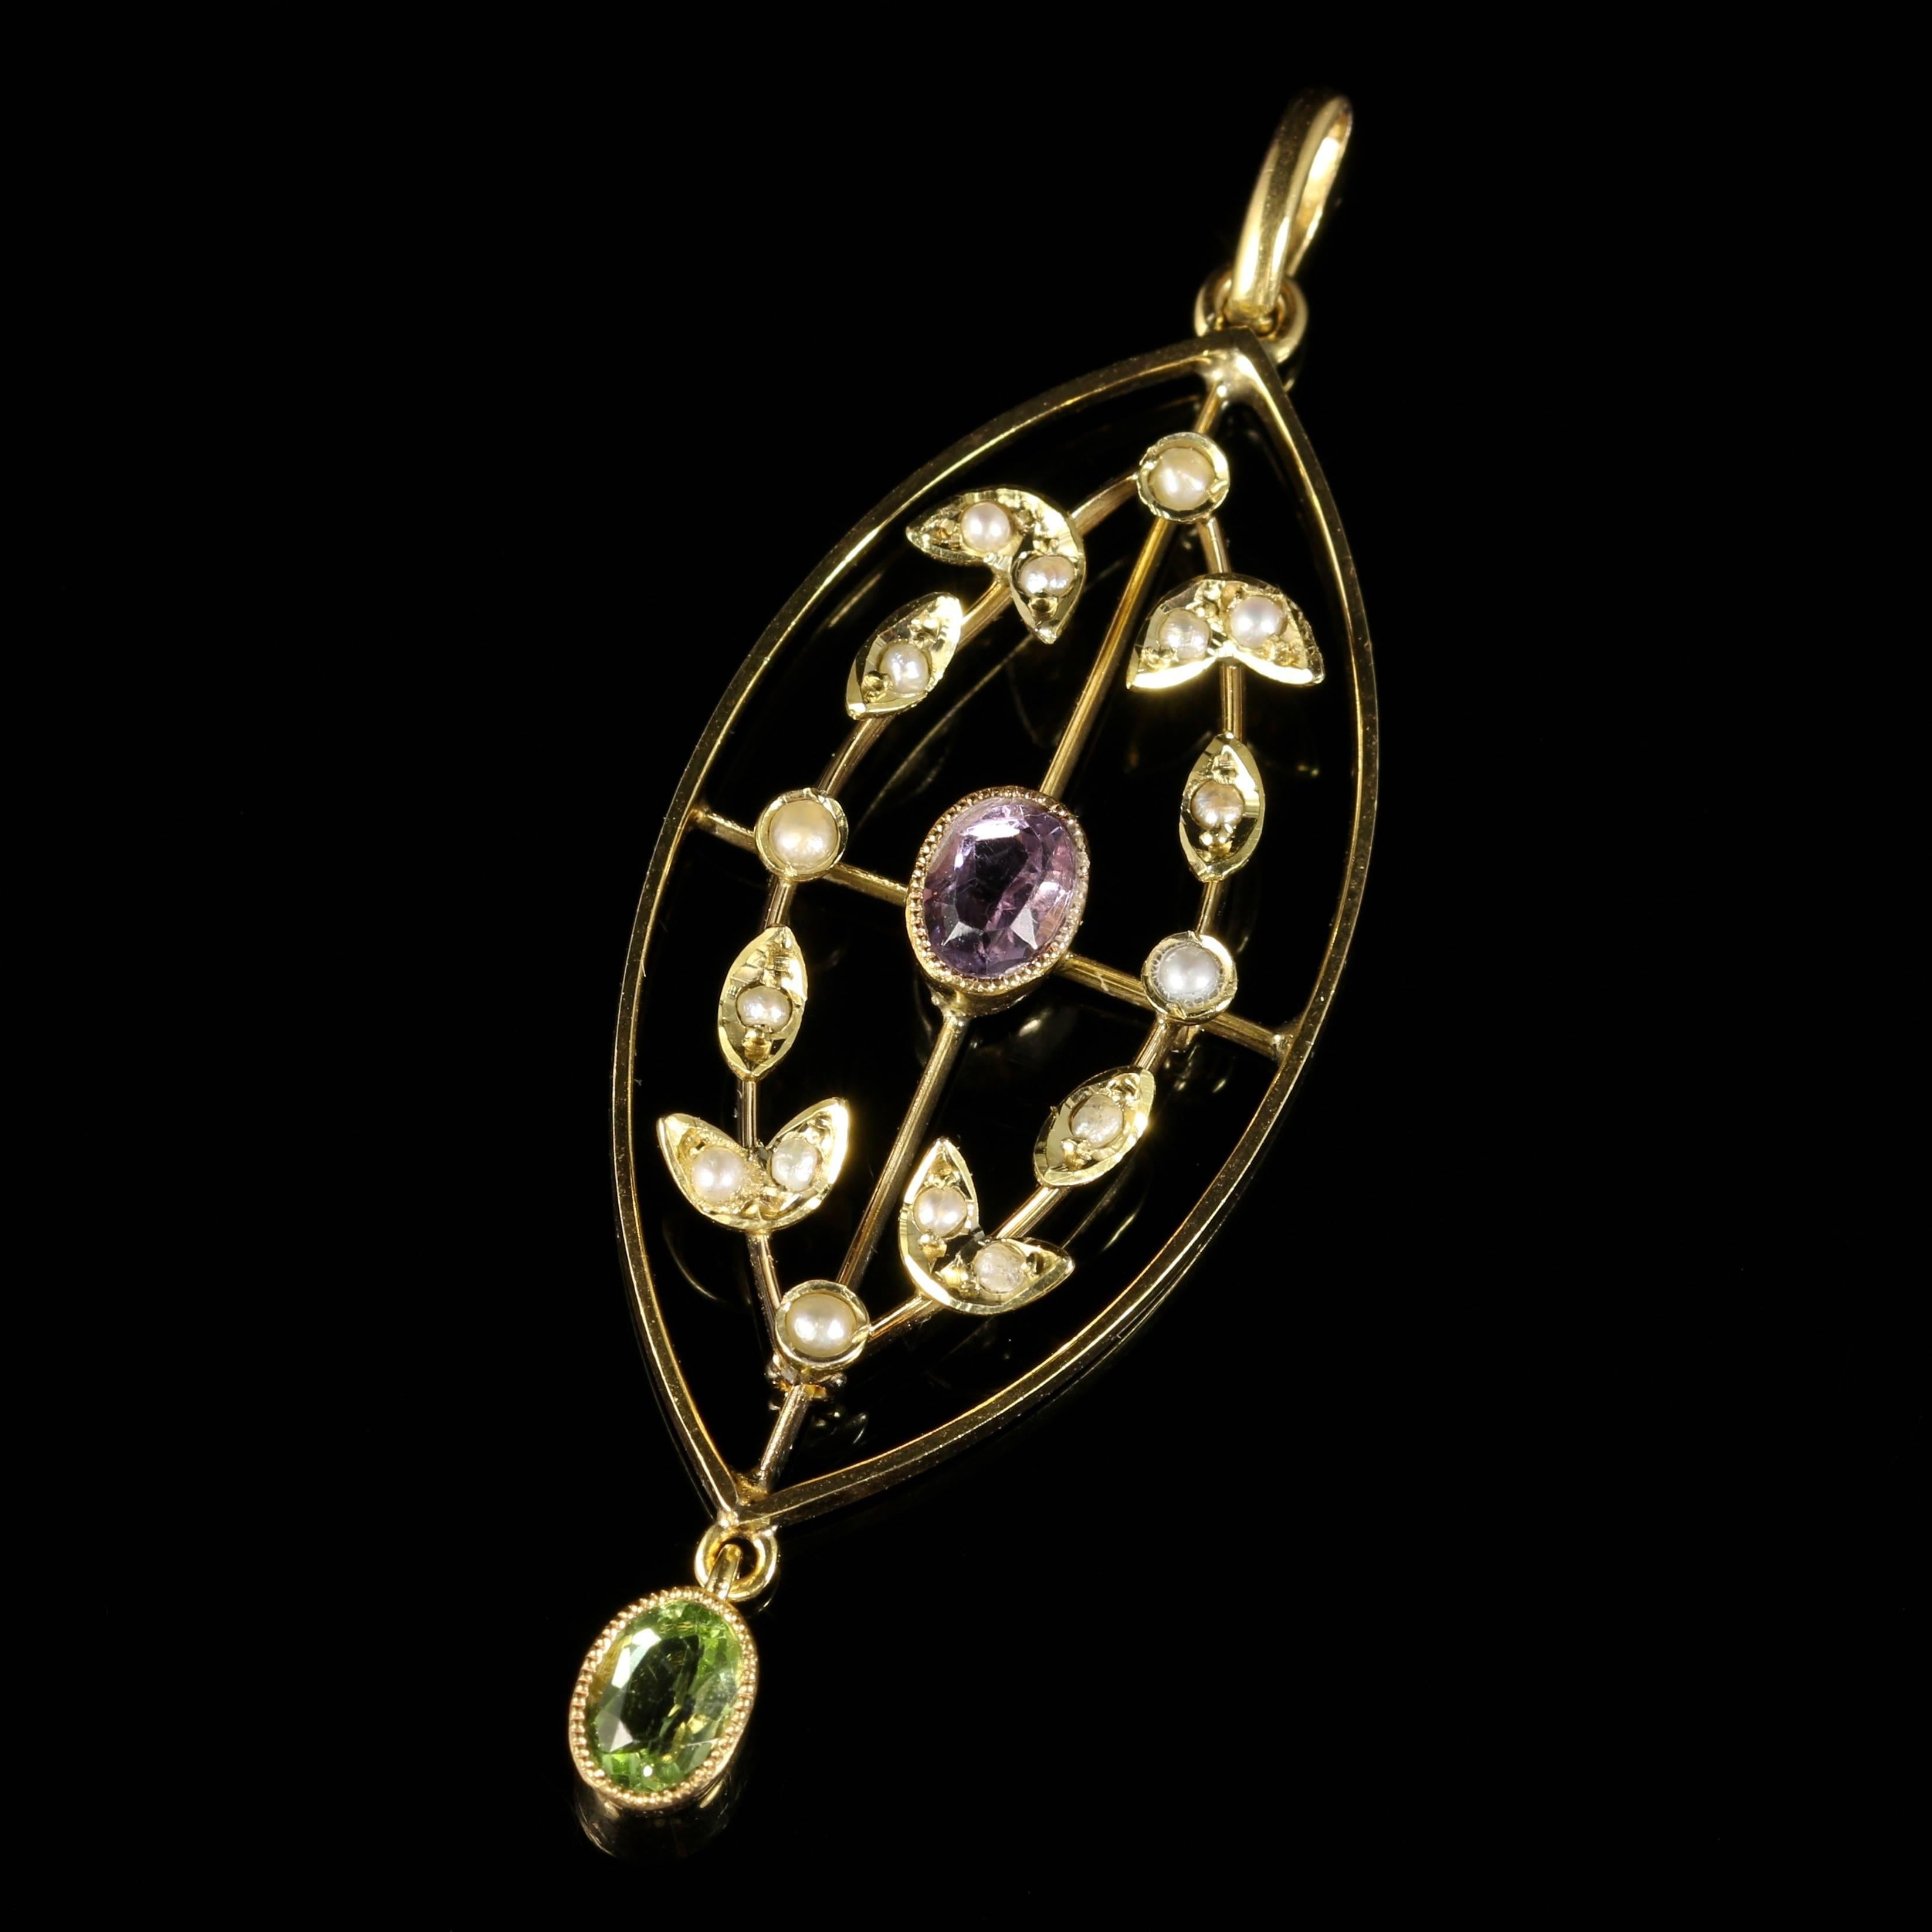 For more details please click continue reading down below...

This fabulous antique 9ct Gold Suffragette pendant is genuine Victorian, Circa 1900. 

The beautiful Suffragette pendant boasts a central violet Amethyst, a rich green Peridot dropper and